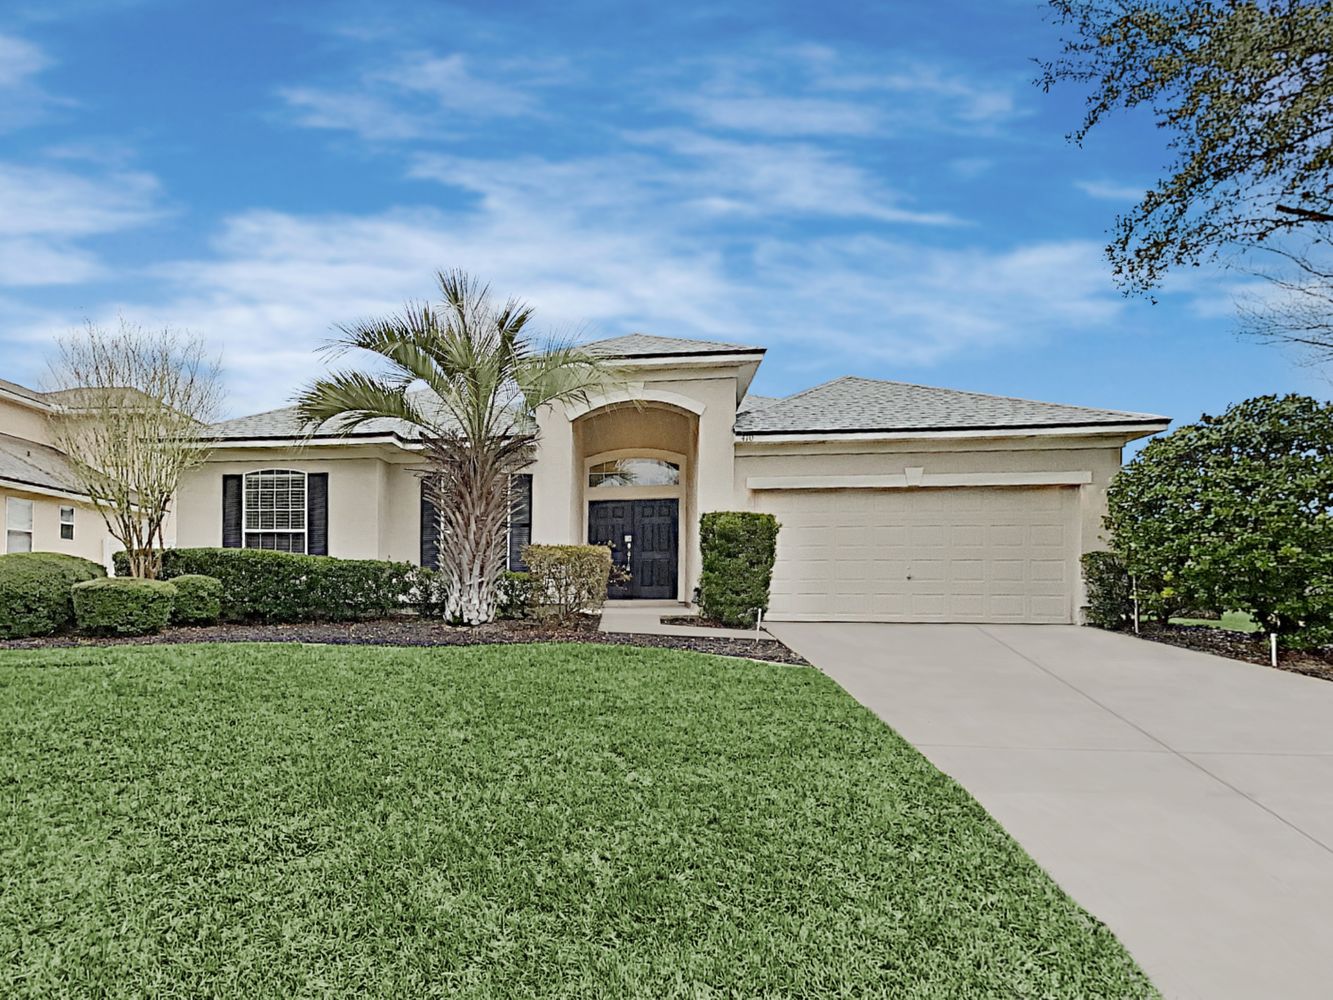 Gorgeous home with a long driveway and two-car garage at Invitation Homes Jacksonville.